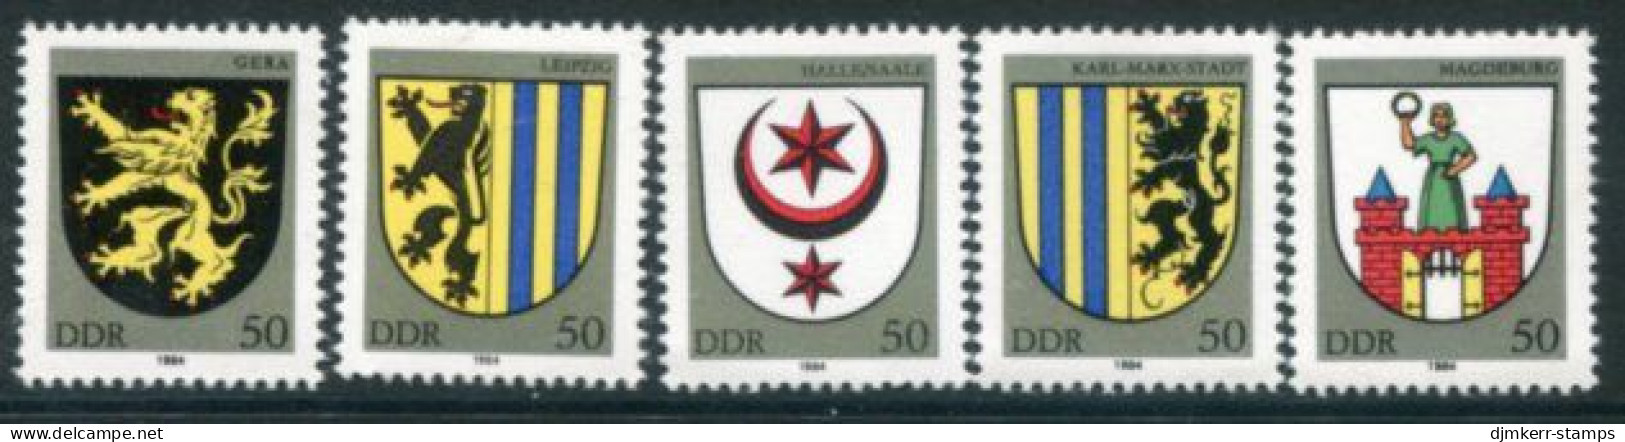 DDR 1984 Town Arms II MNH / **.  Michel 2857-61 - Neufs